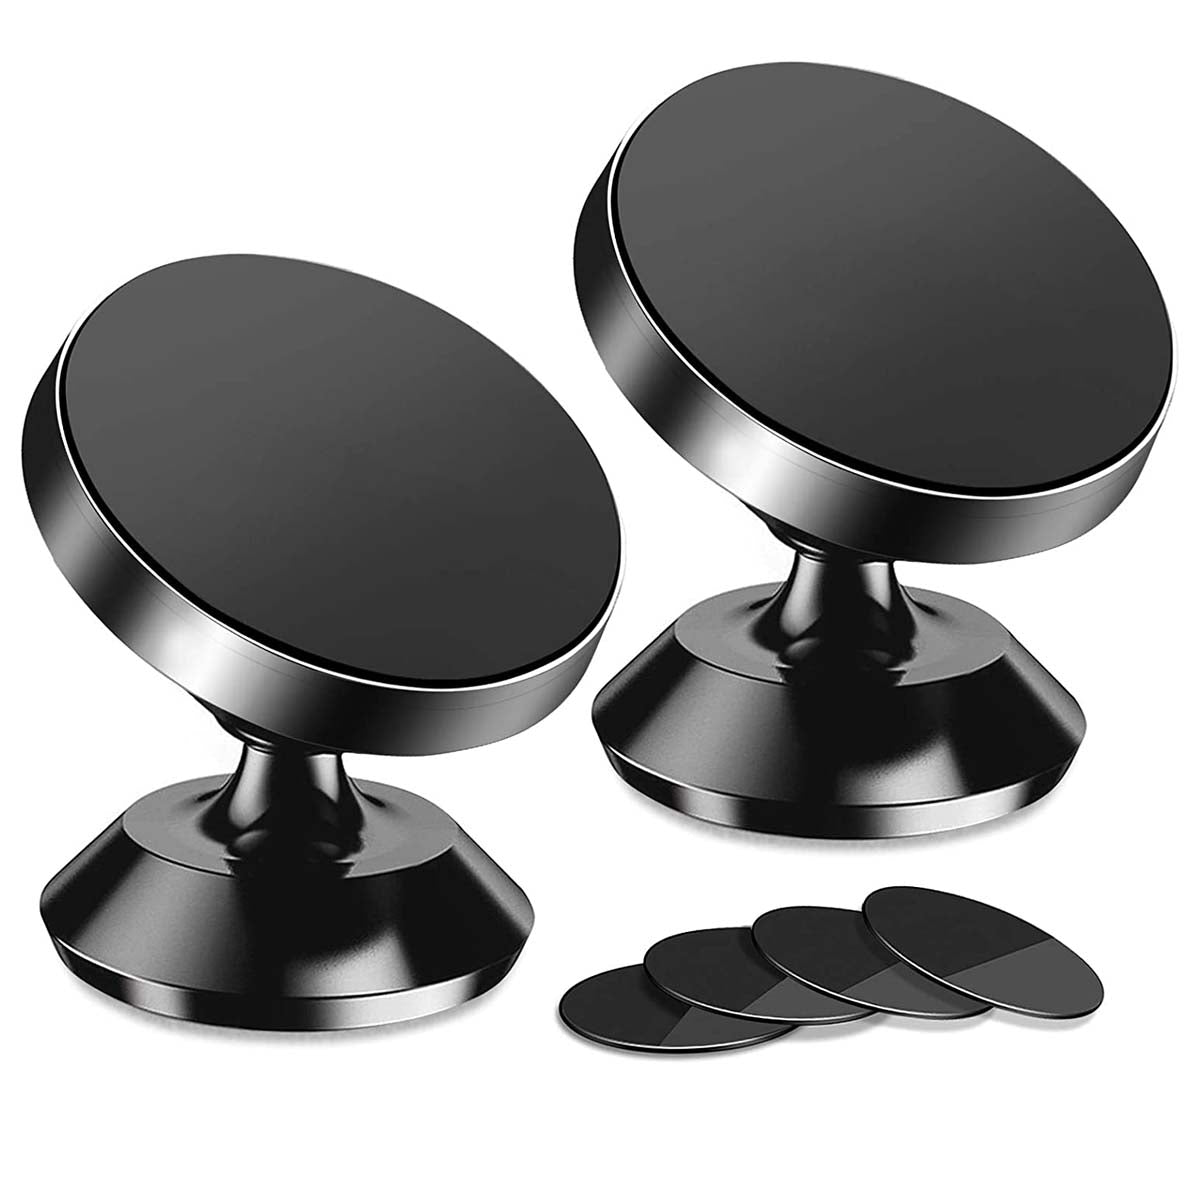 [2 Pack ] Magnetic Phone Mount, Custom For Cars, [ Super Strong Magnet ] [ with 4 Metal Plate ] car Magnetic Phone Holder, [ 360° Rotation ] Universal Dashboard car Mount Fits All Cell Phones, Car Accessories HY13982